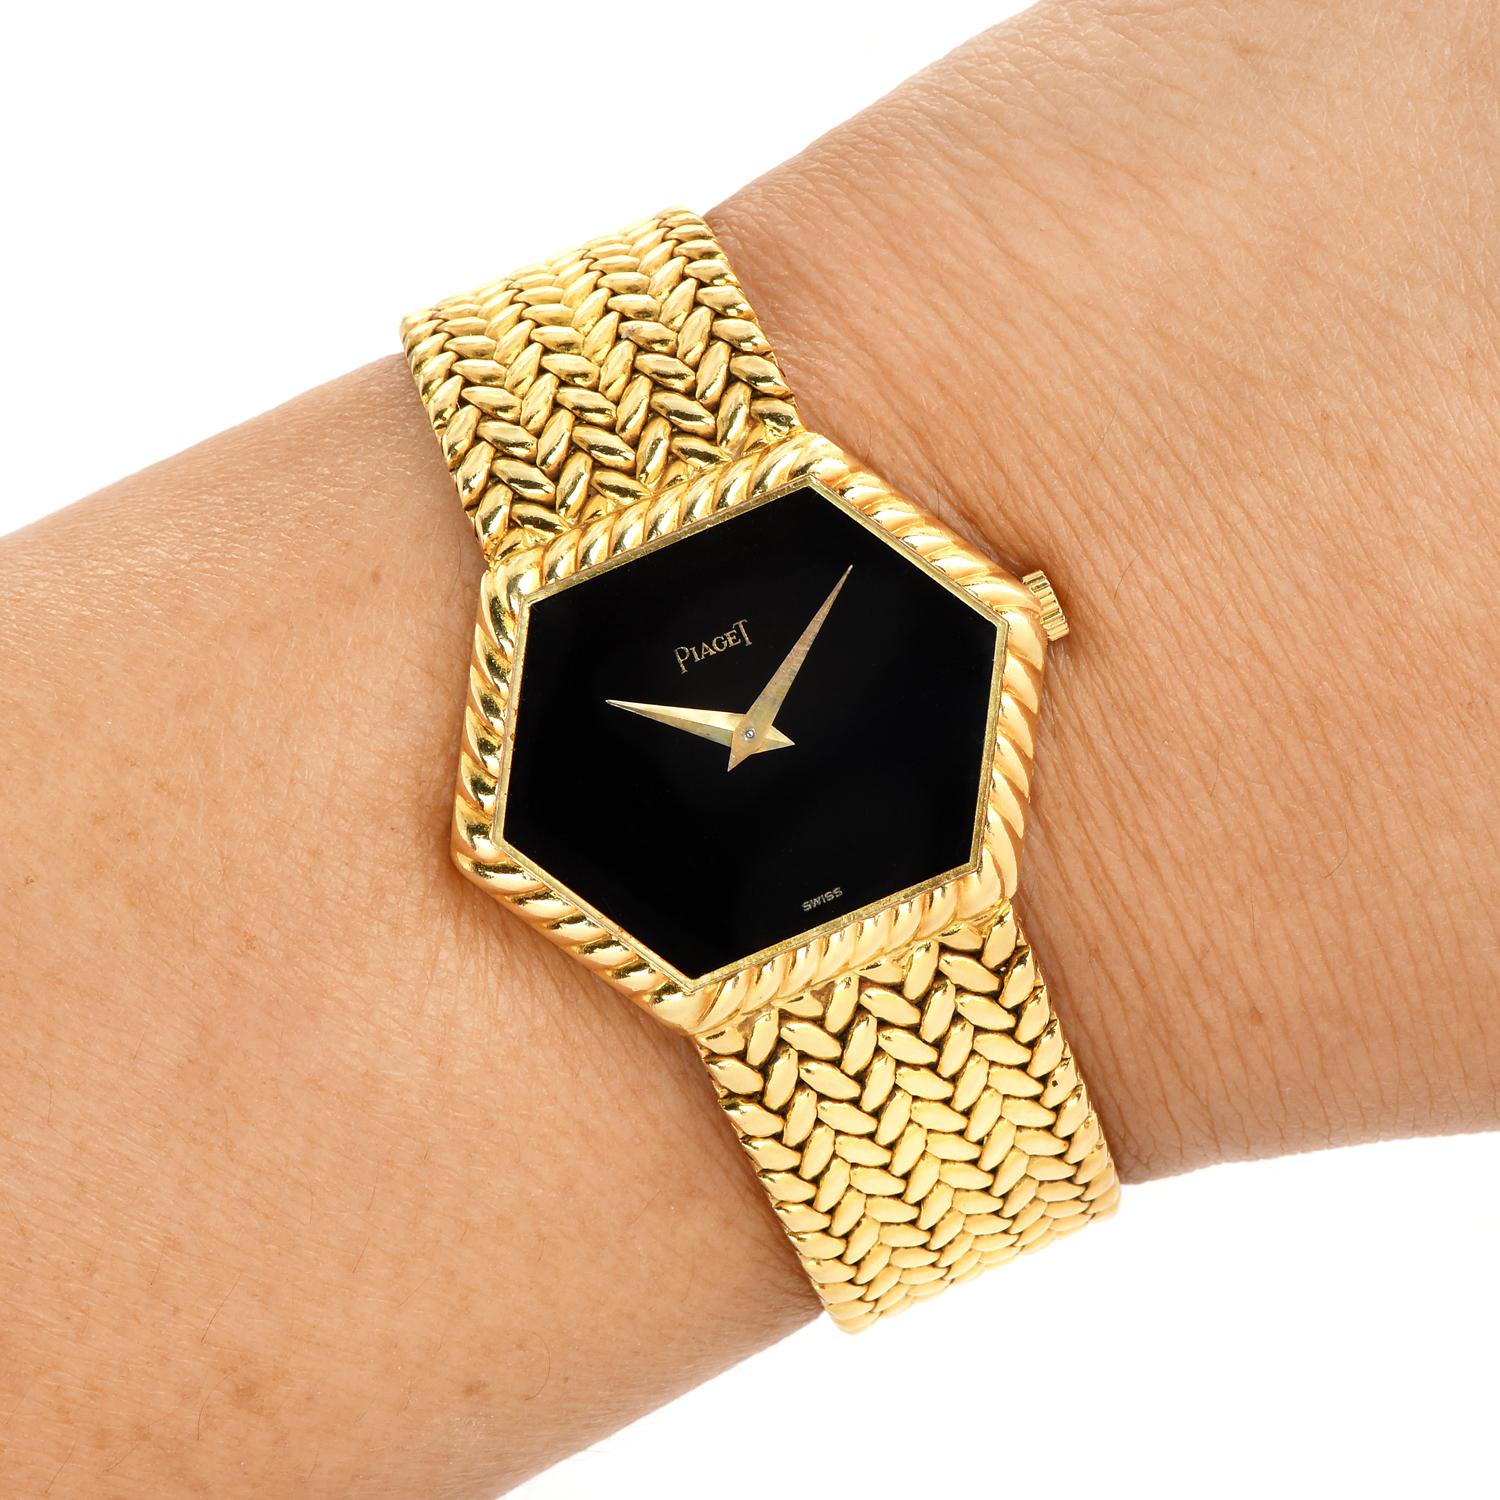 Pre-Owned Piaget reference number 9559, rare hexagonal bezel.

Elegant solid all 18K Yellow gold watch, features a 30 mm x 23 mm, 18k yellow gold Case with Fold over clasp.
This Vintage 18k Gold watch has a Black Onyx Dial with gold-tone